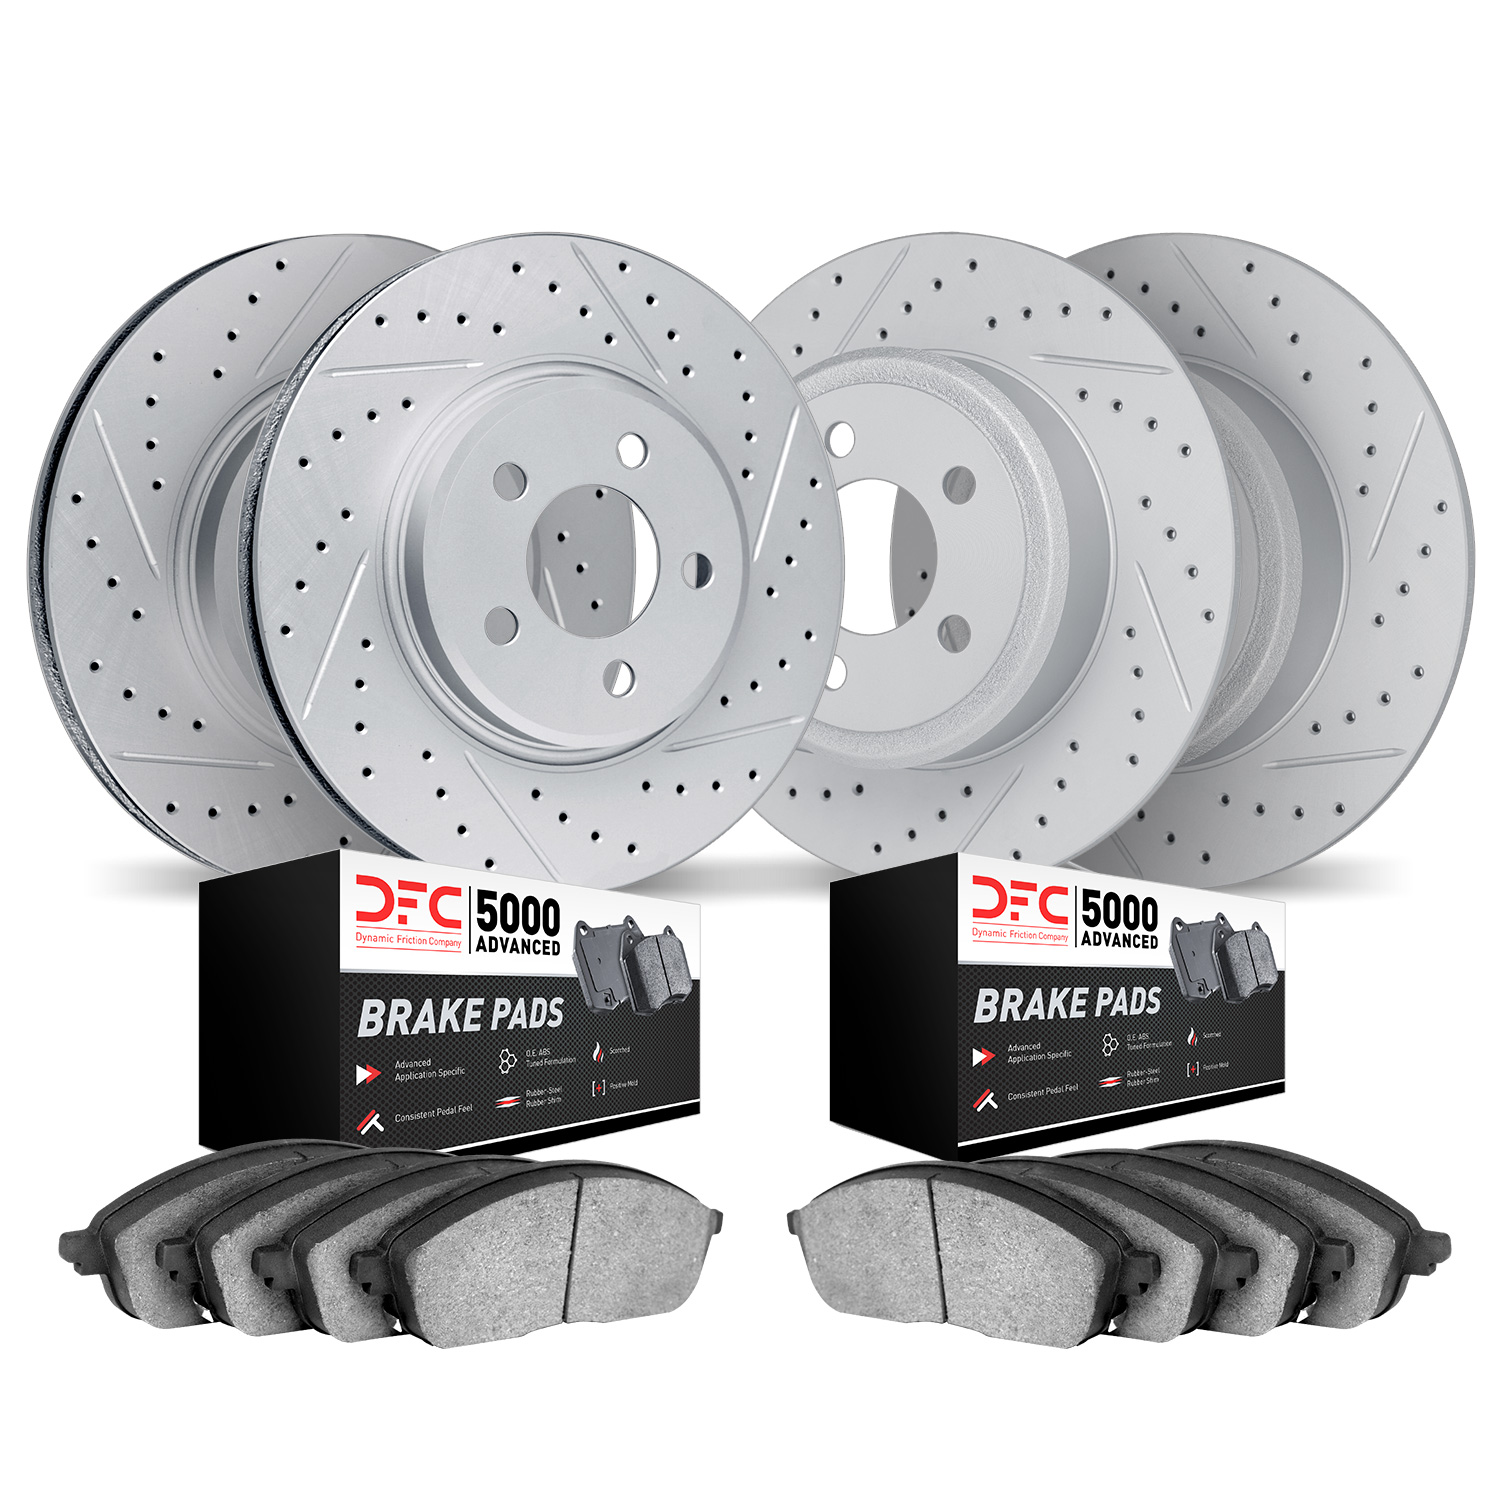 2504-54261 Geoperformance Drilled/Slotted Rotors w/5000 Advanced Brake Pads Kit, 2002-2005 Ford/Lincoln/Mercury/Mazda, Position: